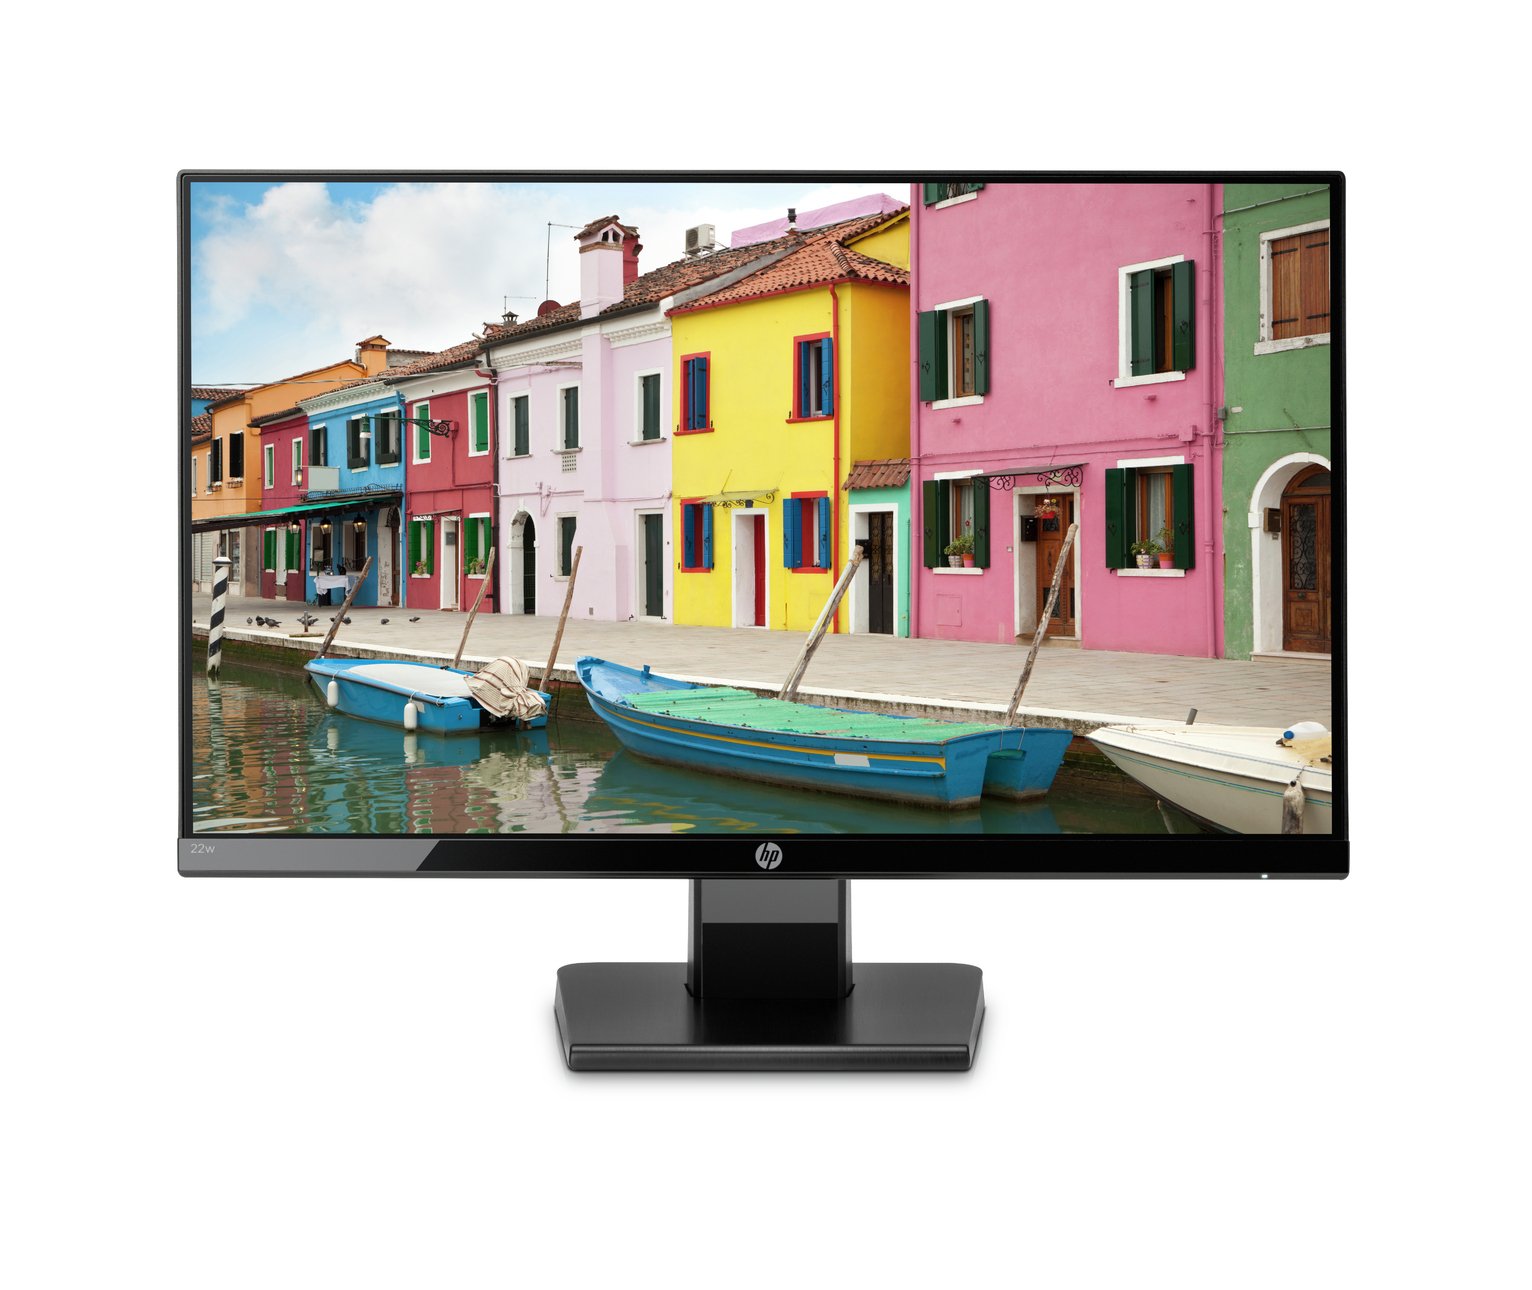 HP 22w 21.5 Inch FHD IPS Monitor Review